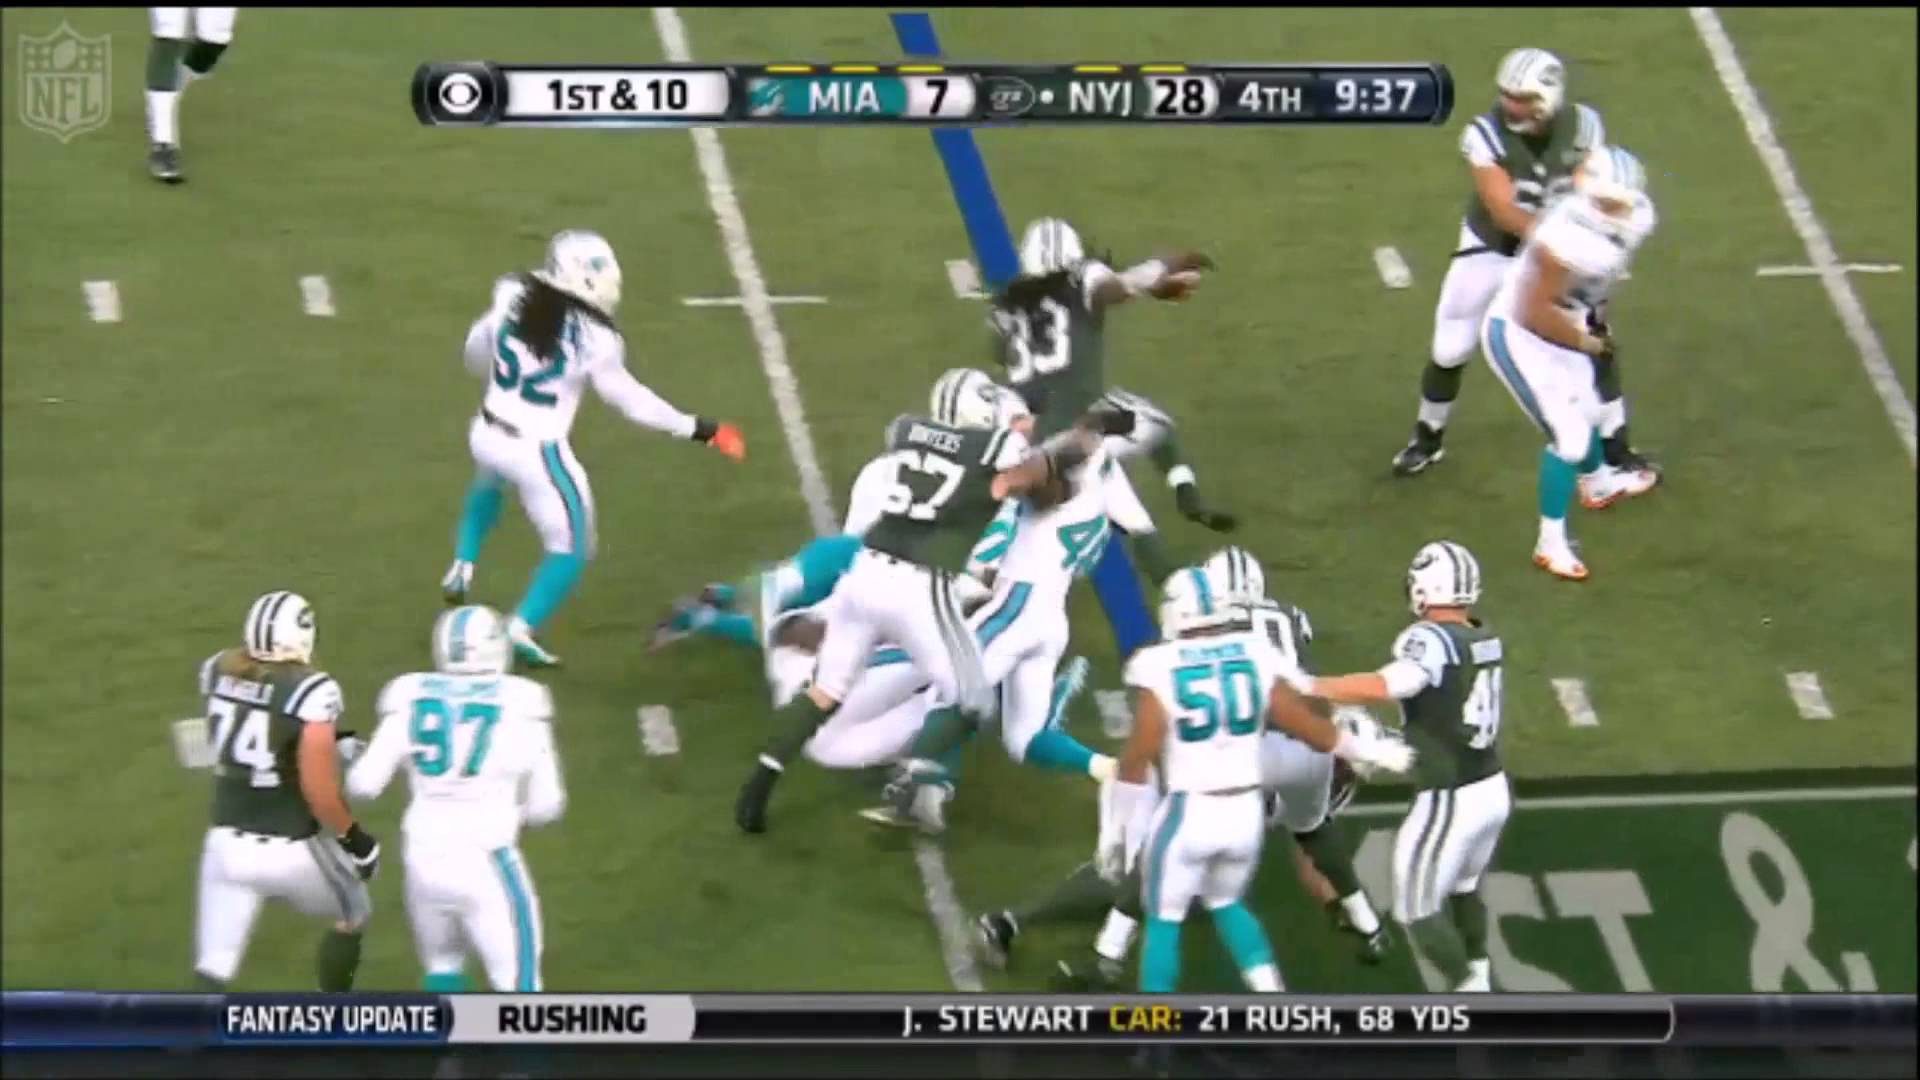 Chris Ivory breaks an unreal amount of tackles for the TD